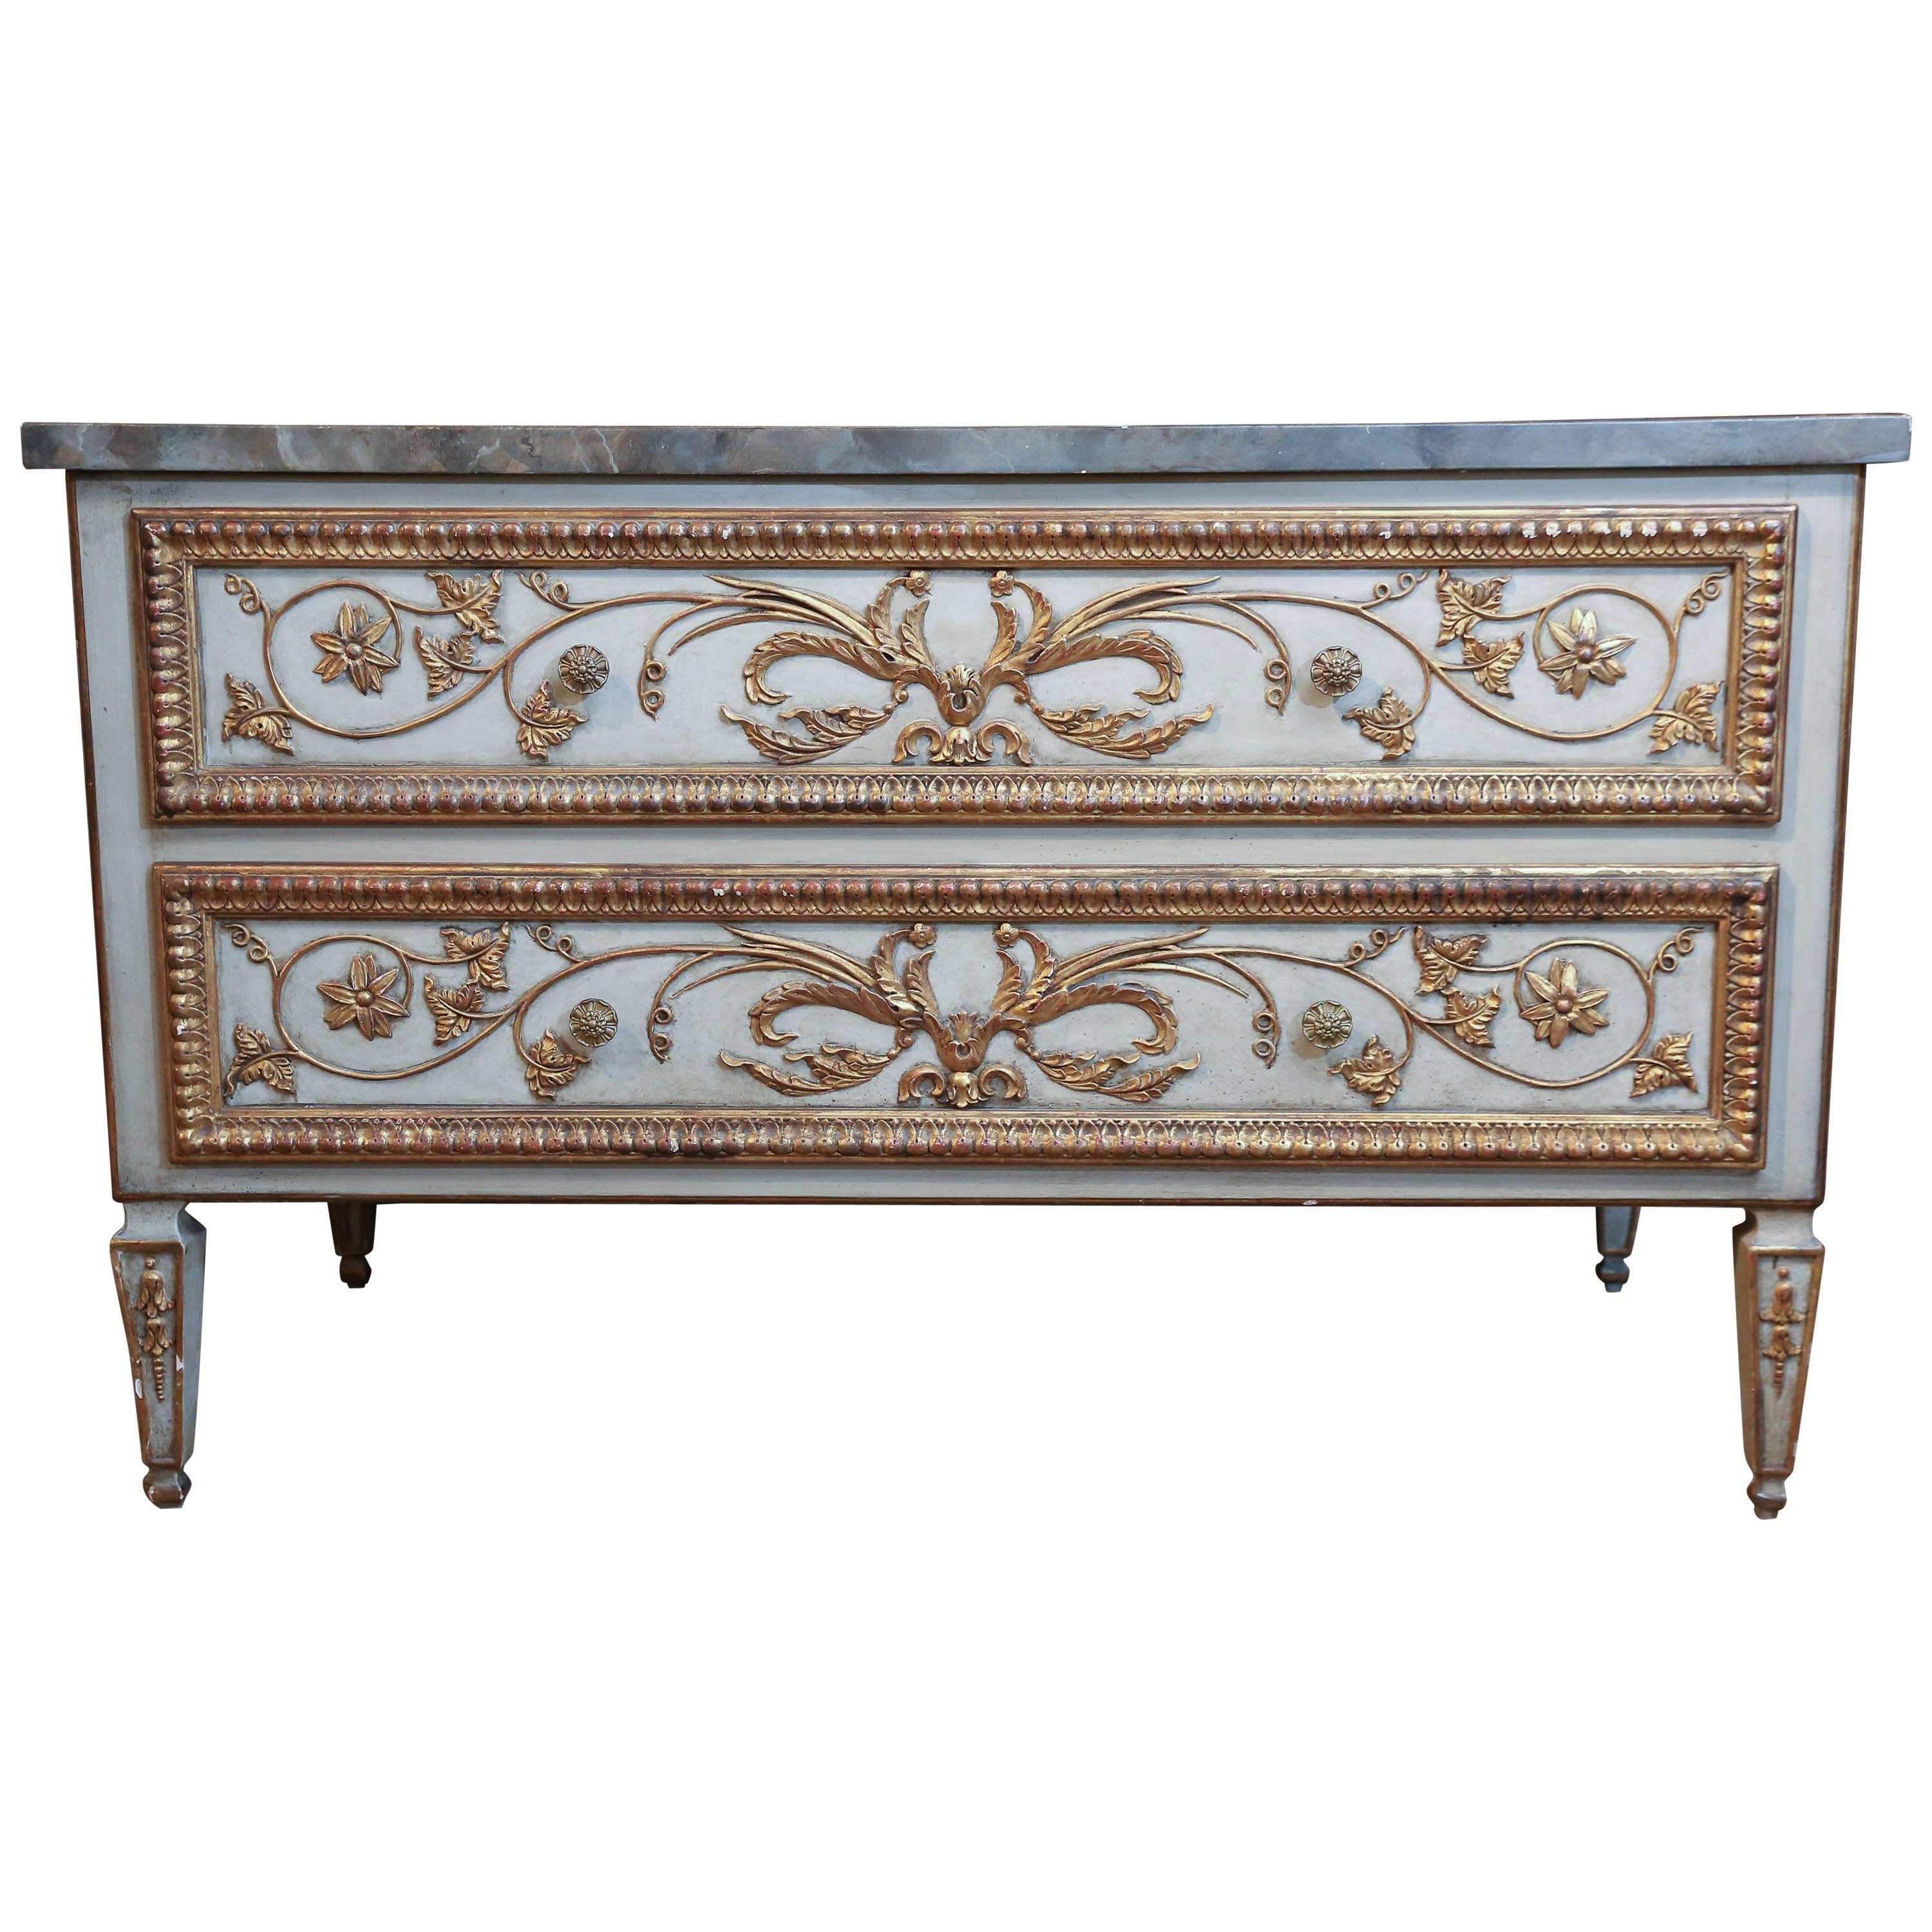 Louis XVI-Style Polychrome and Faux Marbre Commode, 19th Century